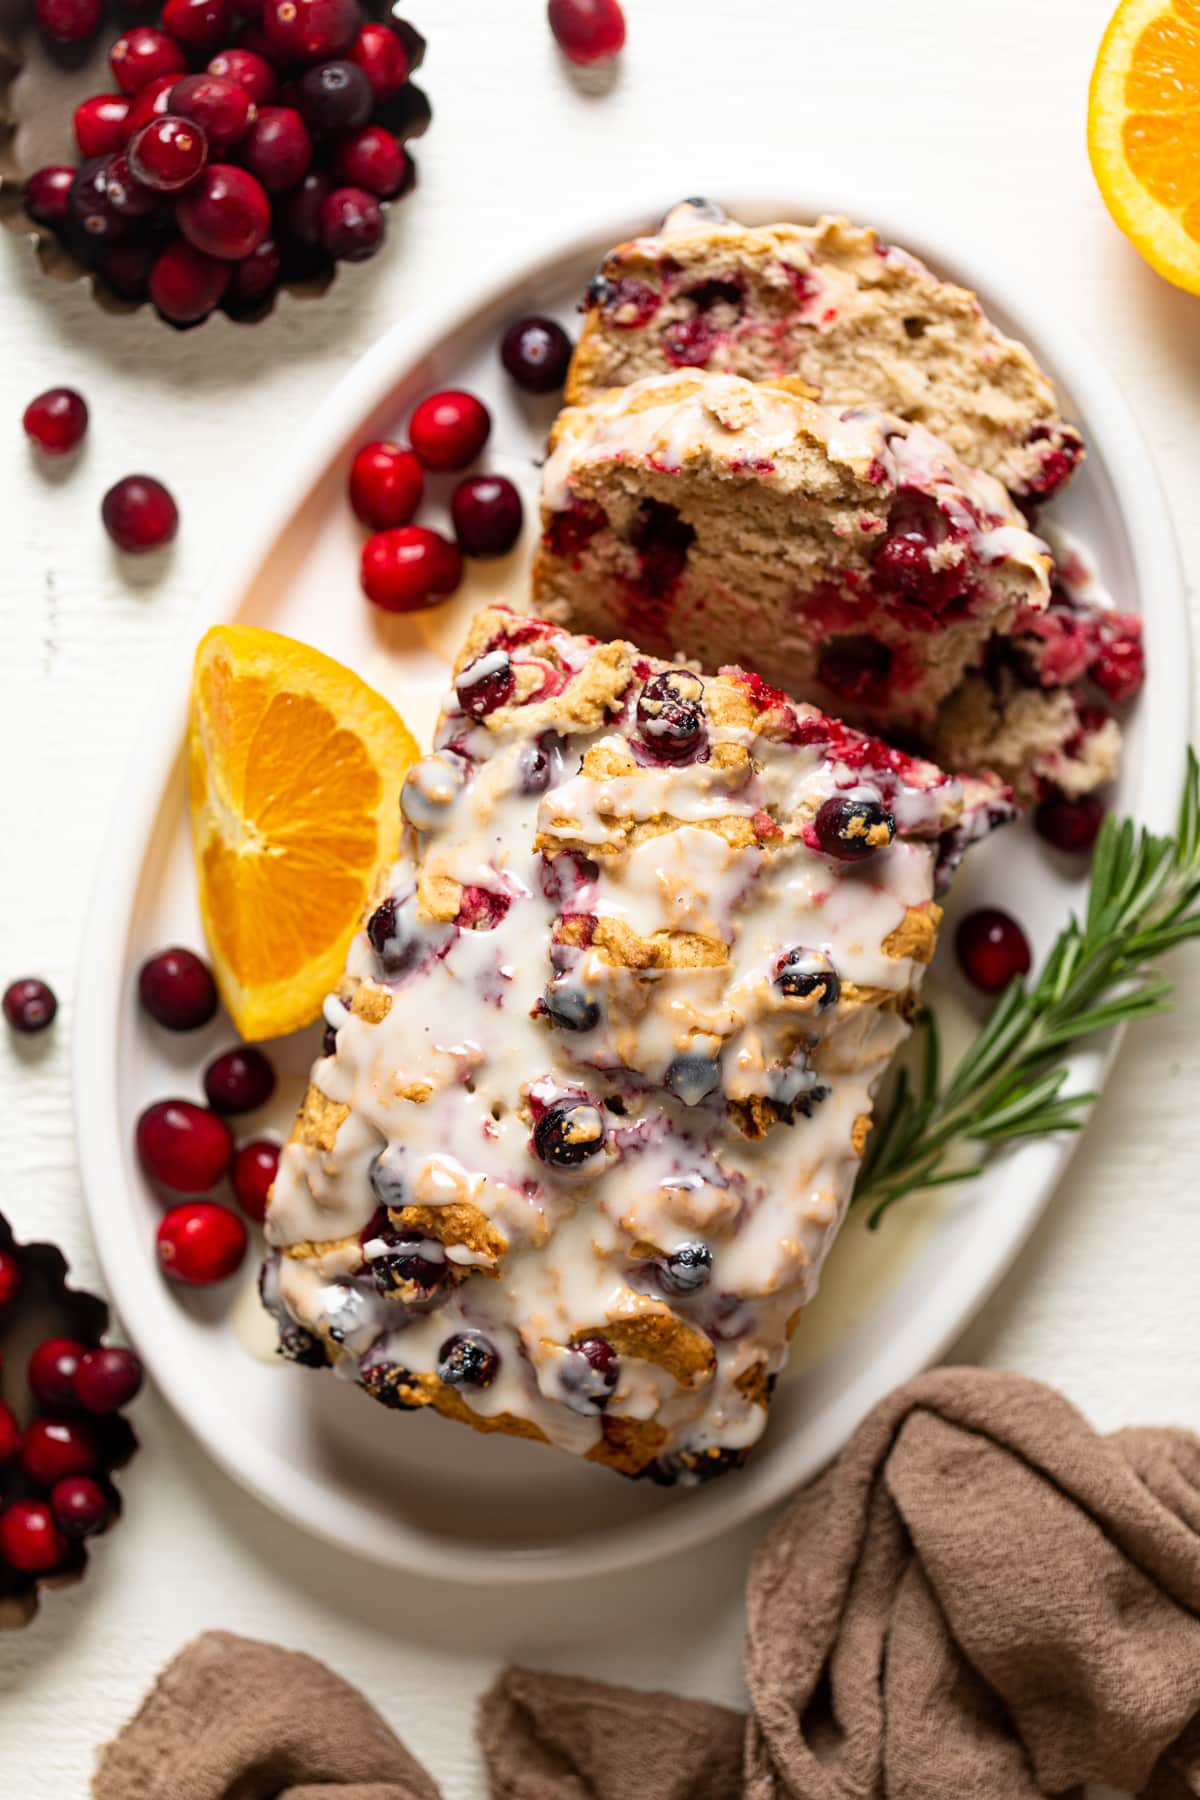 Partially-sliced loaf of Vegan Orange Cranberry Bread drizzled with orange glaze and on a plate